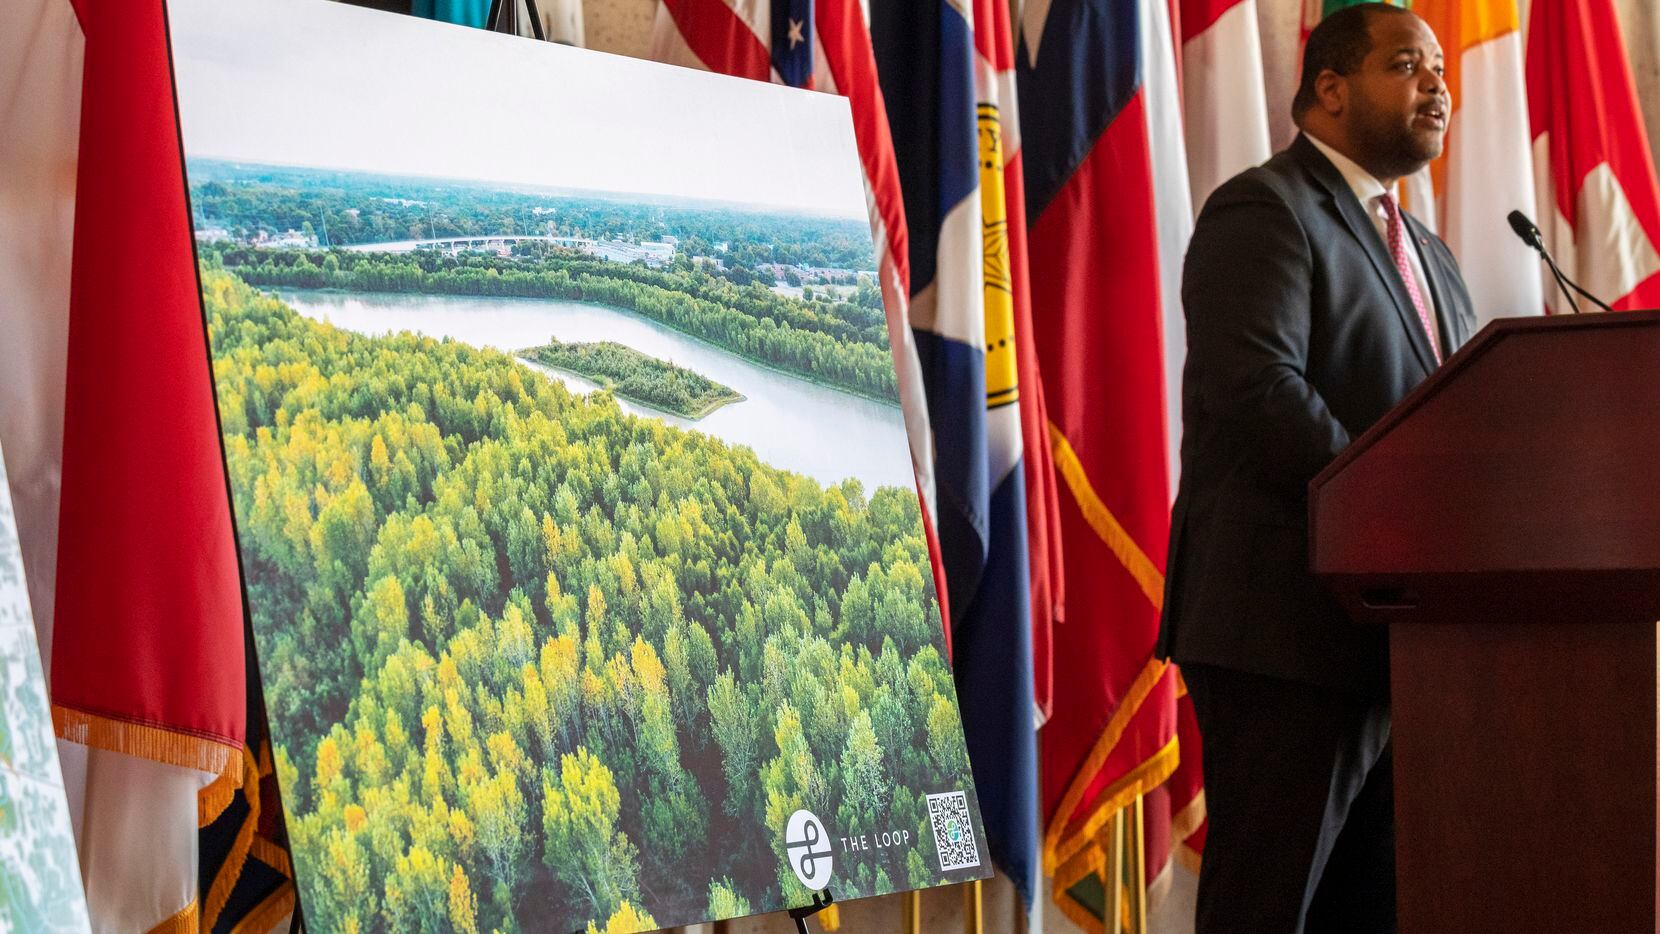 An image of Parkdale Lake is on display as Dallas Mayor Eric Johnson, right, announces a donation of 110 acres of land to the city's Park and Recreation department, including Parkdale Lake, by Oncor Electric Delivery, on Tuesday, Nov. 30, 2021 at City Hall in downtown Dallas.